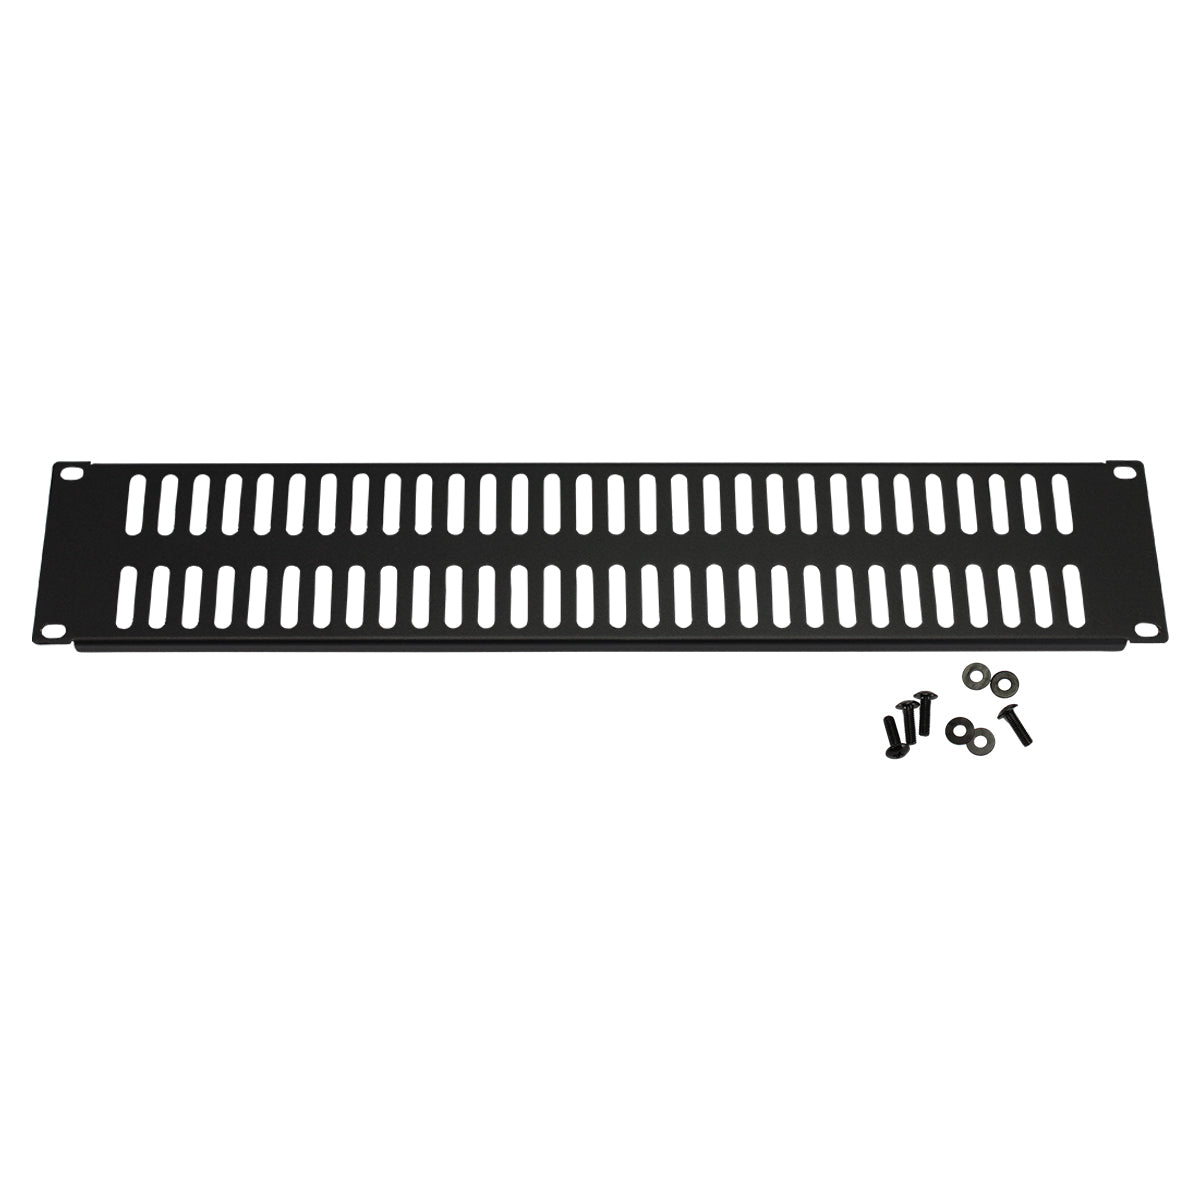 2U Rack Metal Vented Panel for 19in Server Racks and Cabinets